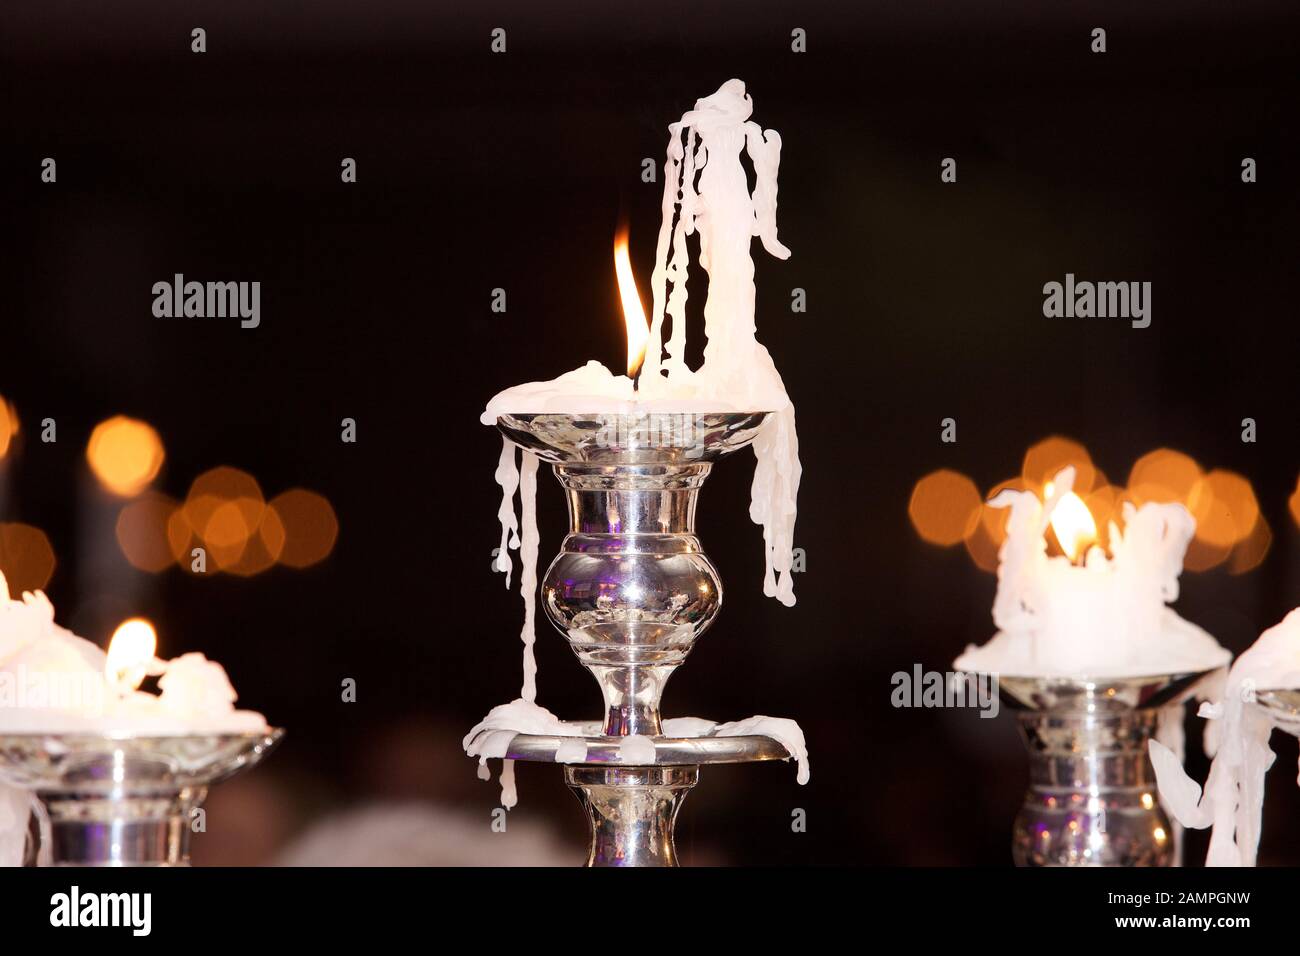 Burning candles in elegant silver candle candleholders. Stock Photo